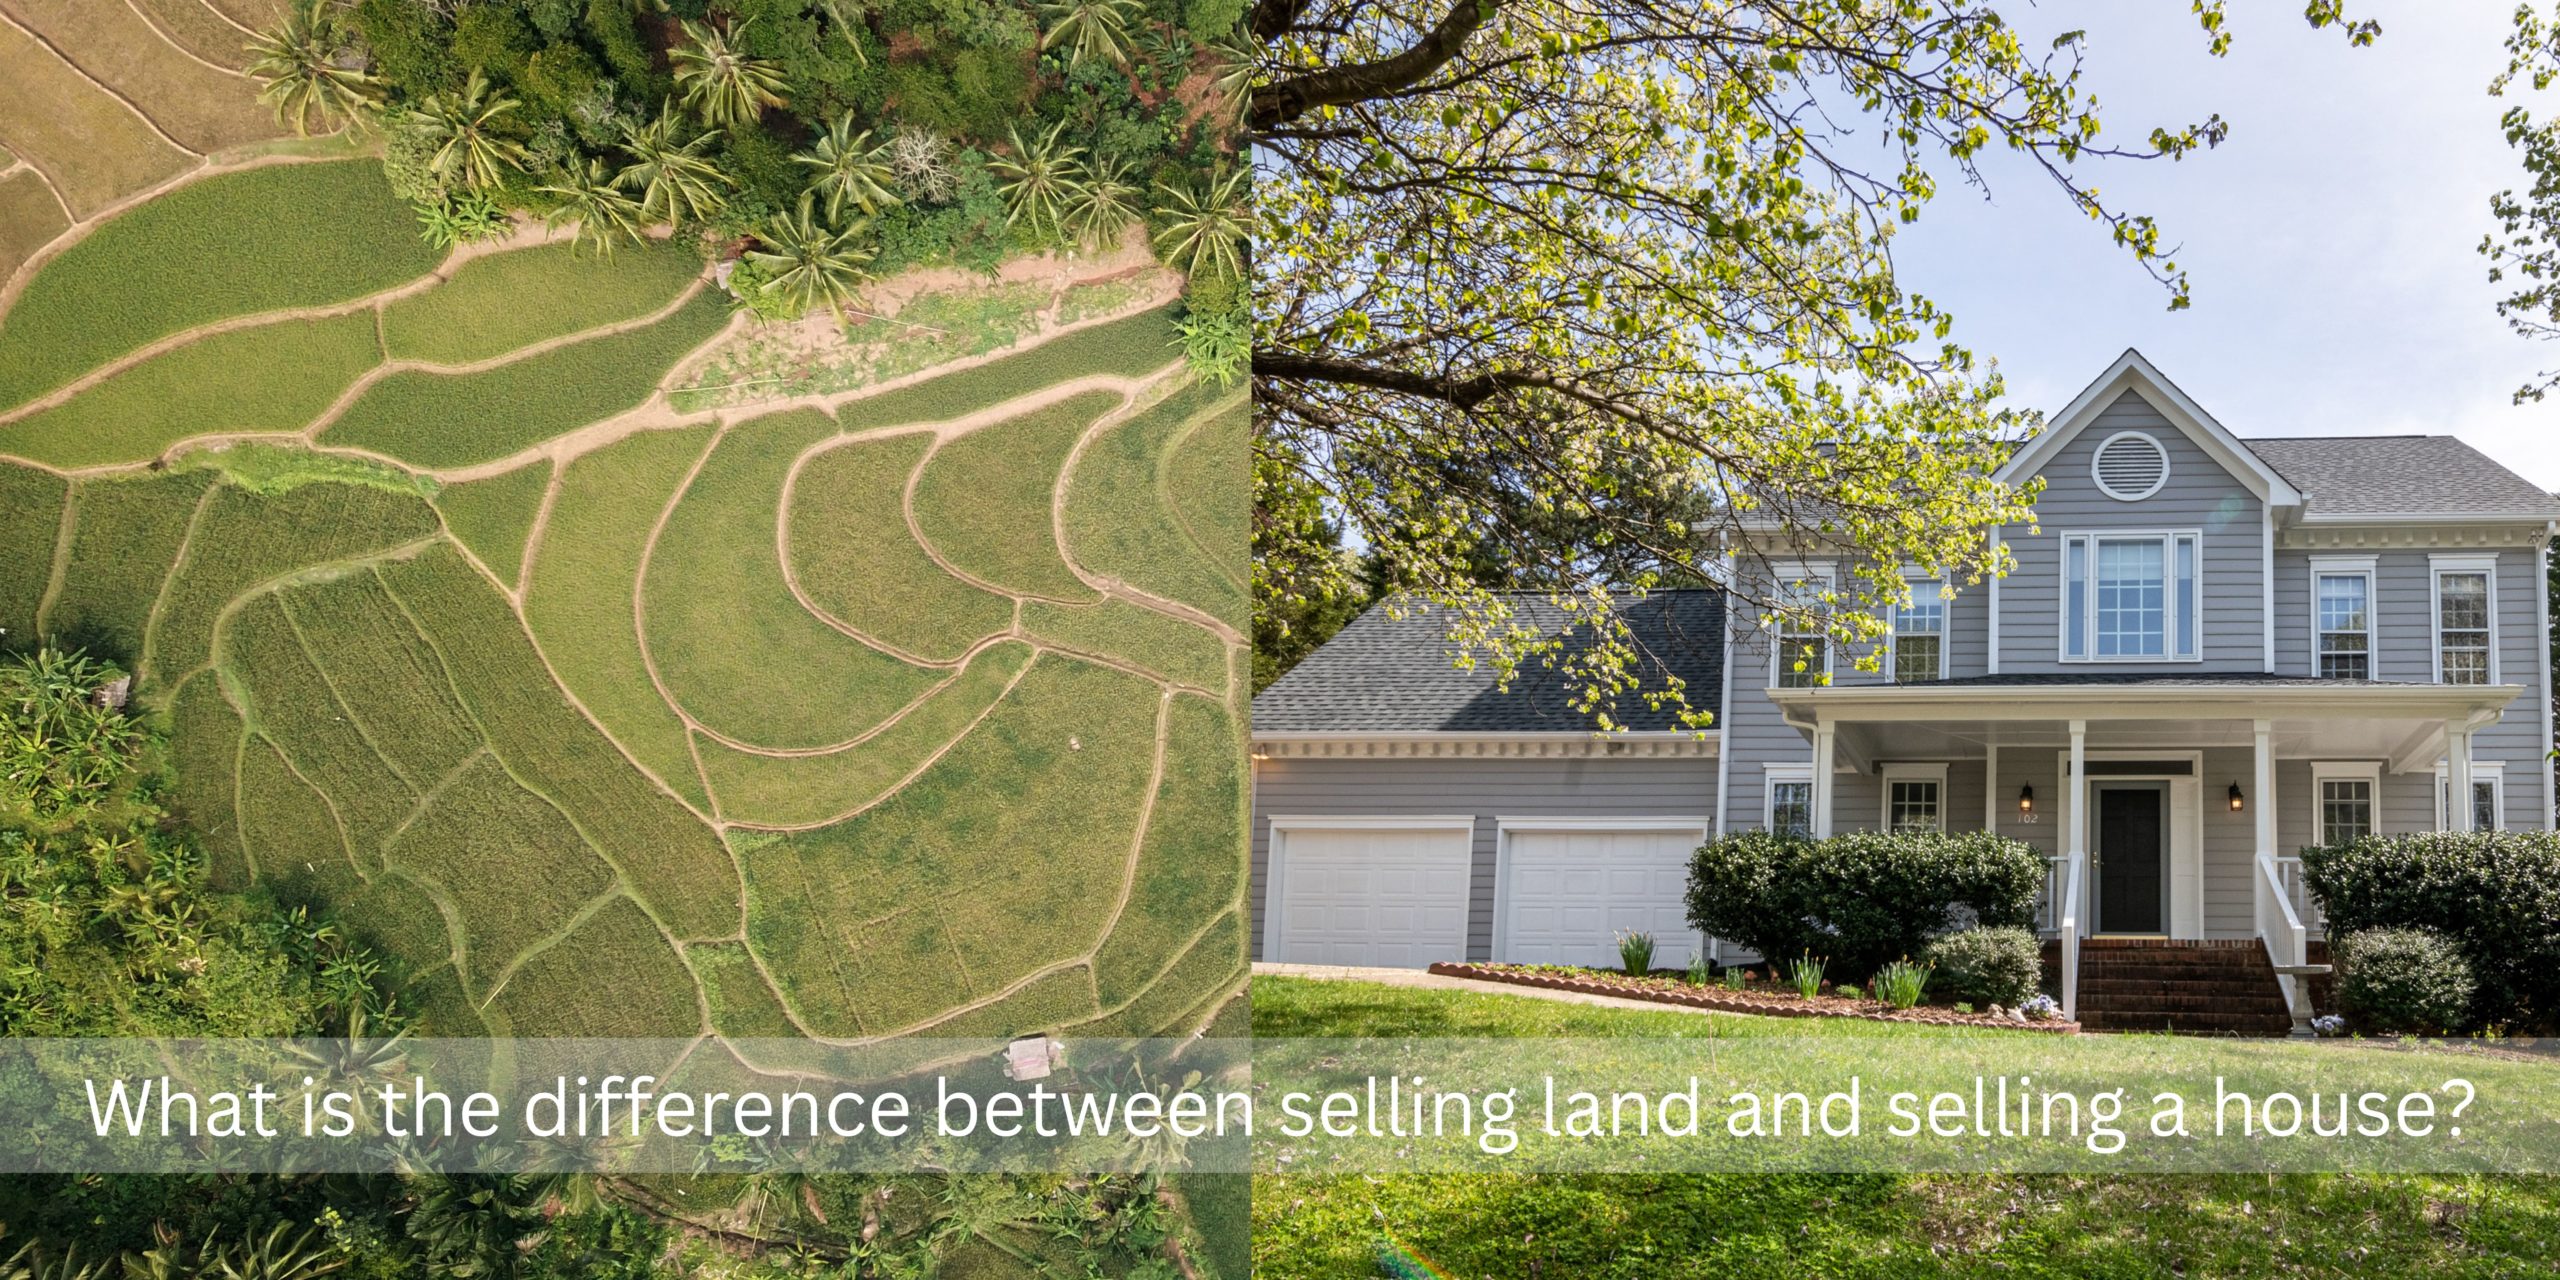 What is the difference between selling land and selling a house